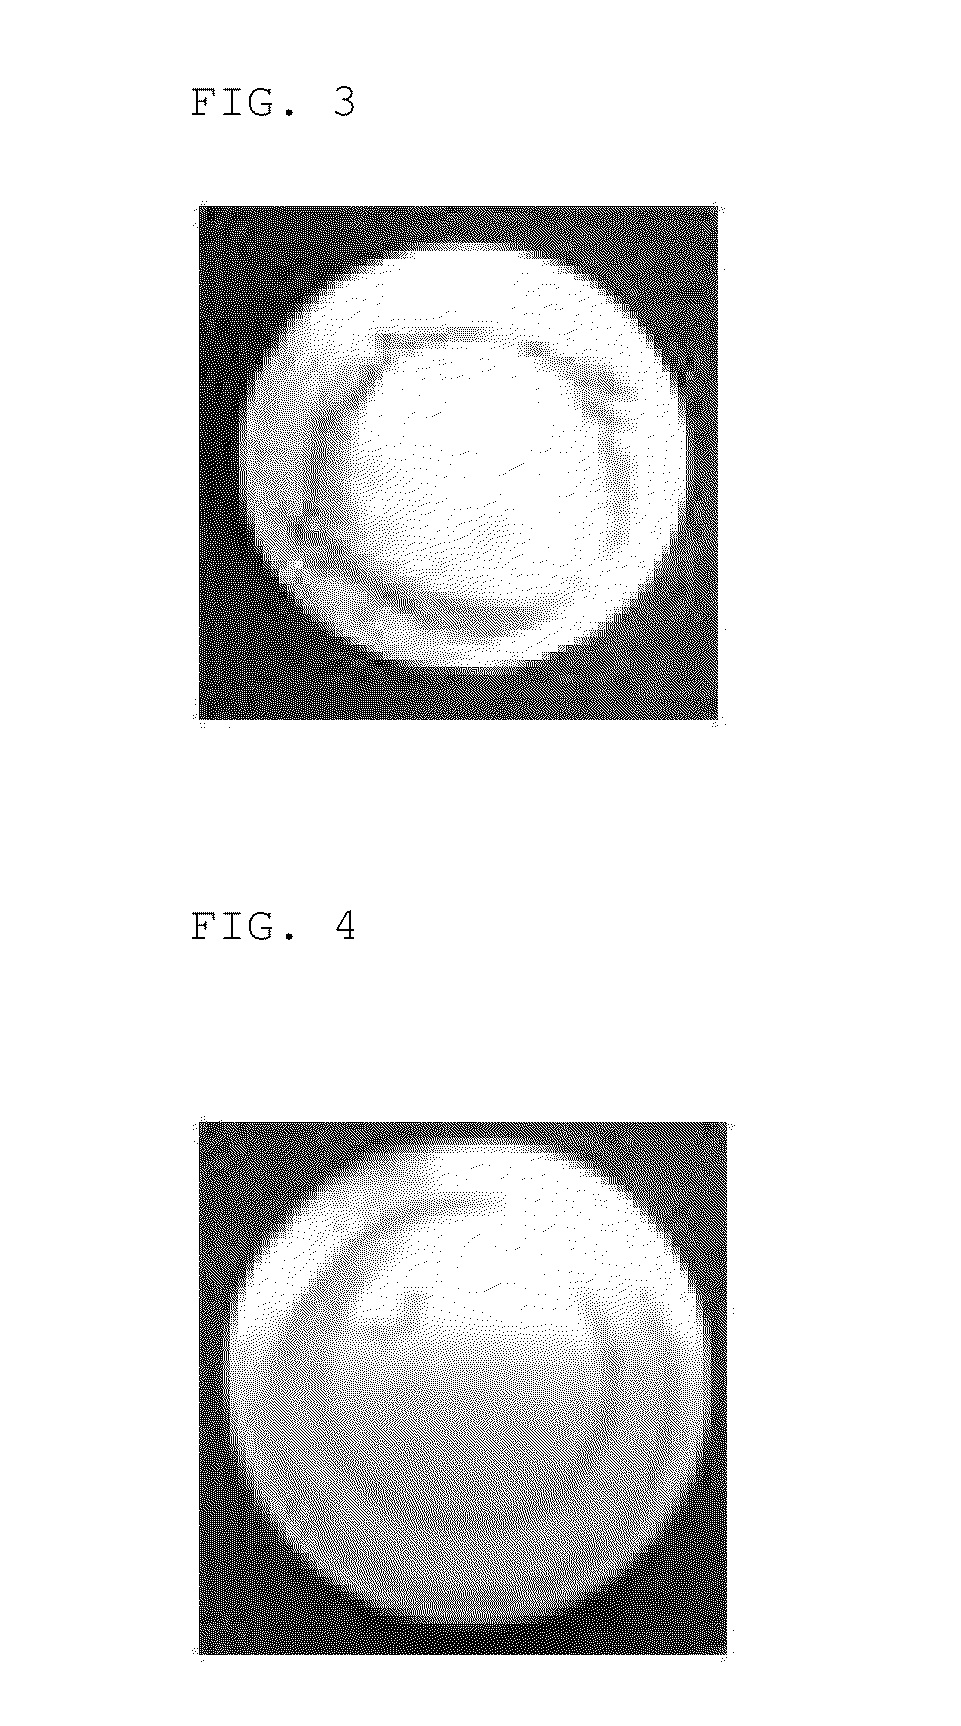 Coating material for aluminum die casting and method for coating the same